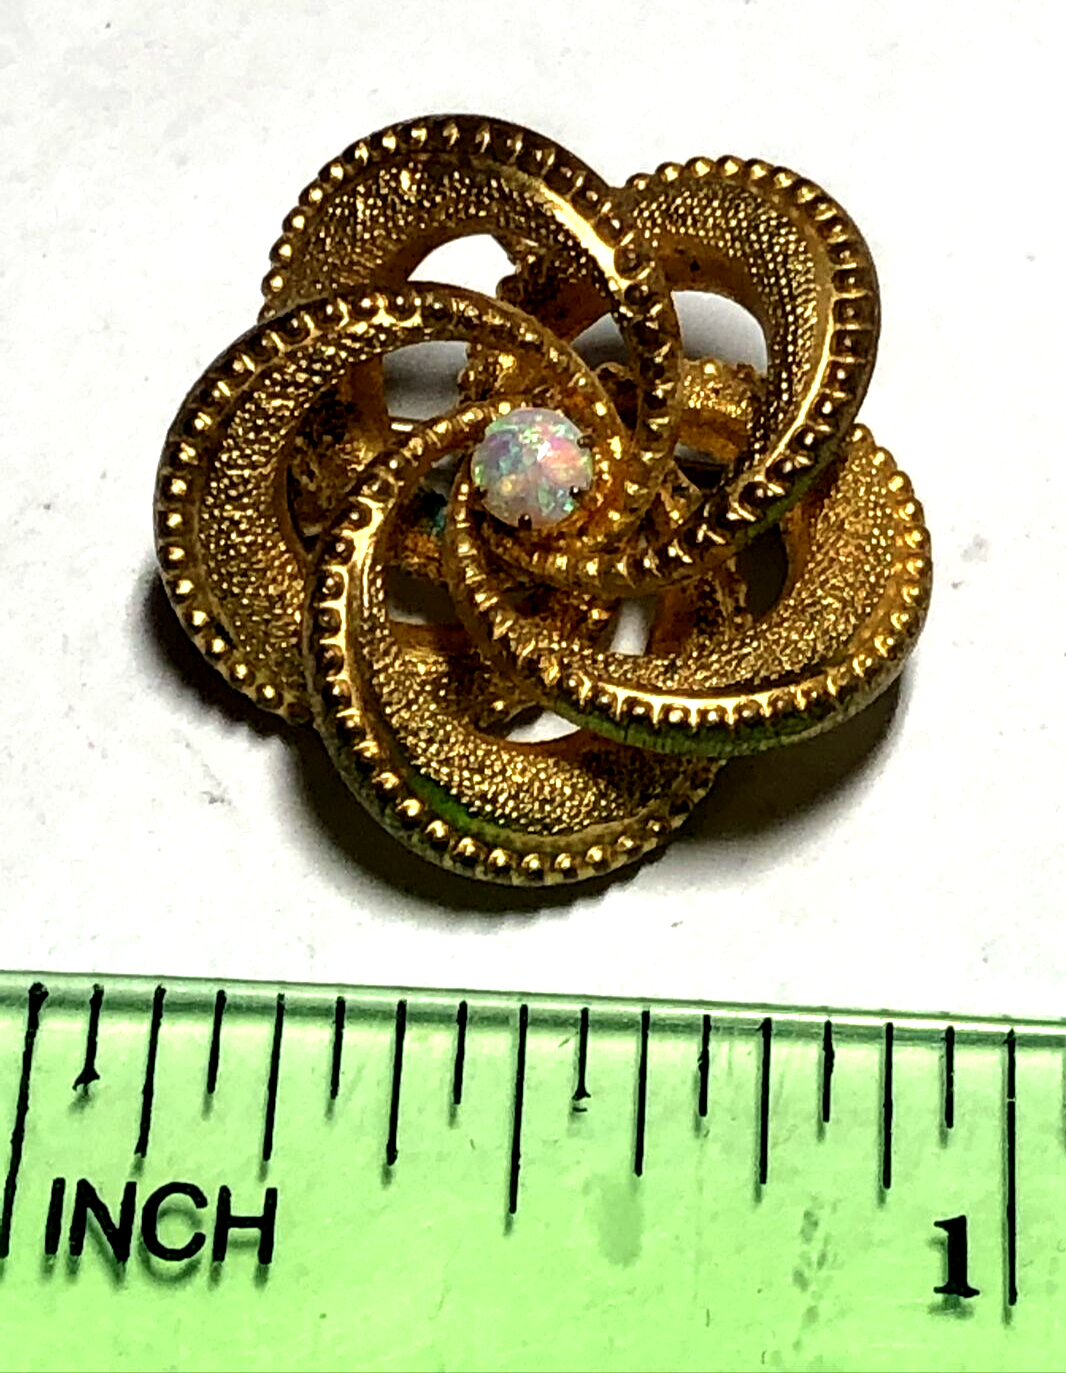 Antique Victorian love knot GF Gold Filled brooch pin with opal gemstone